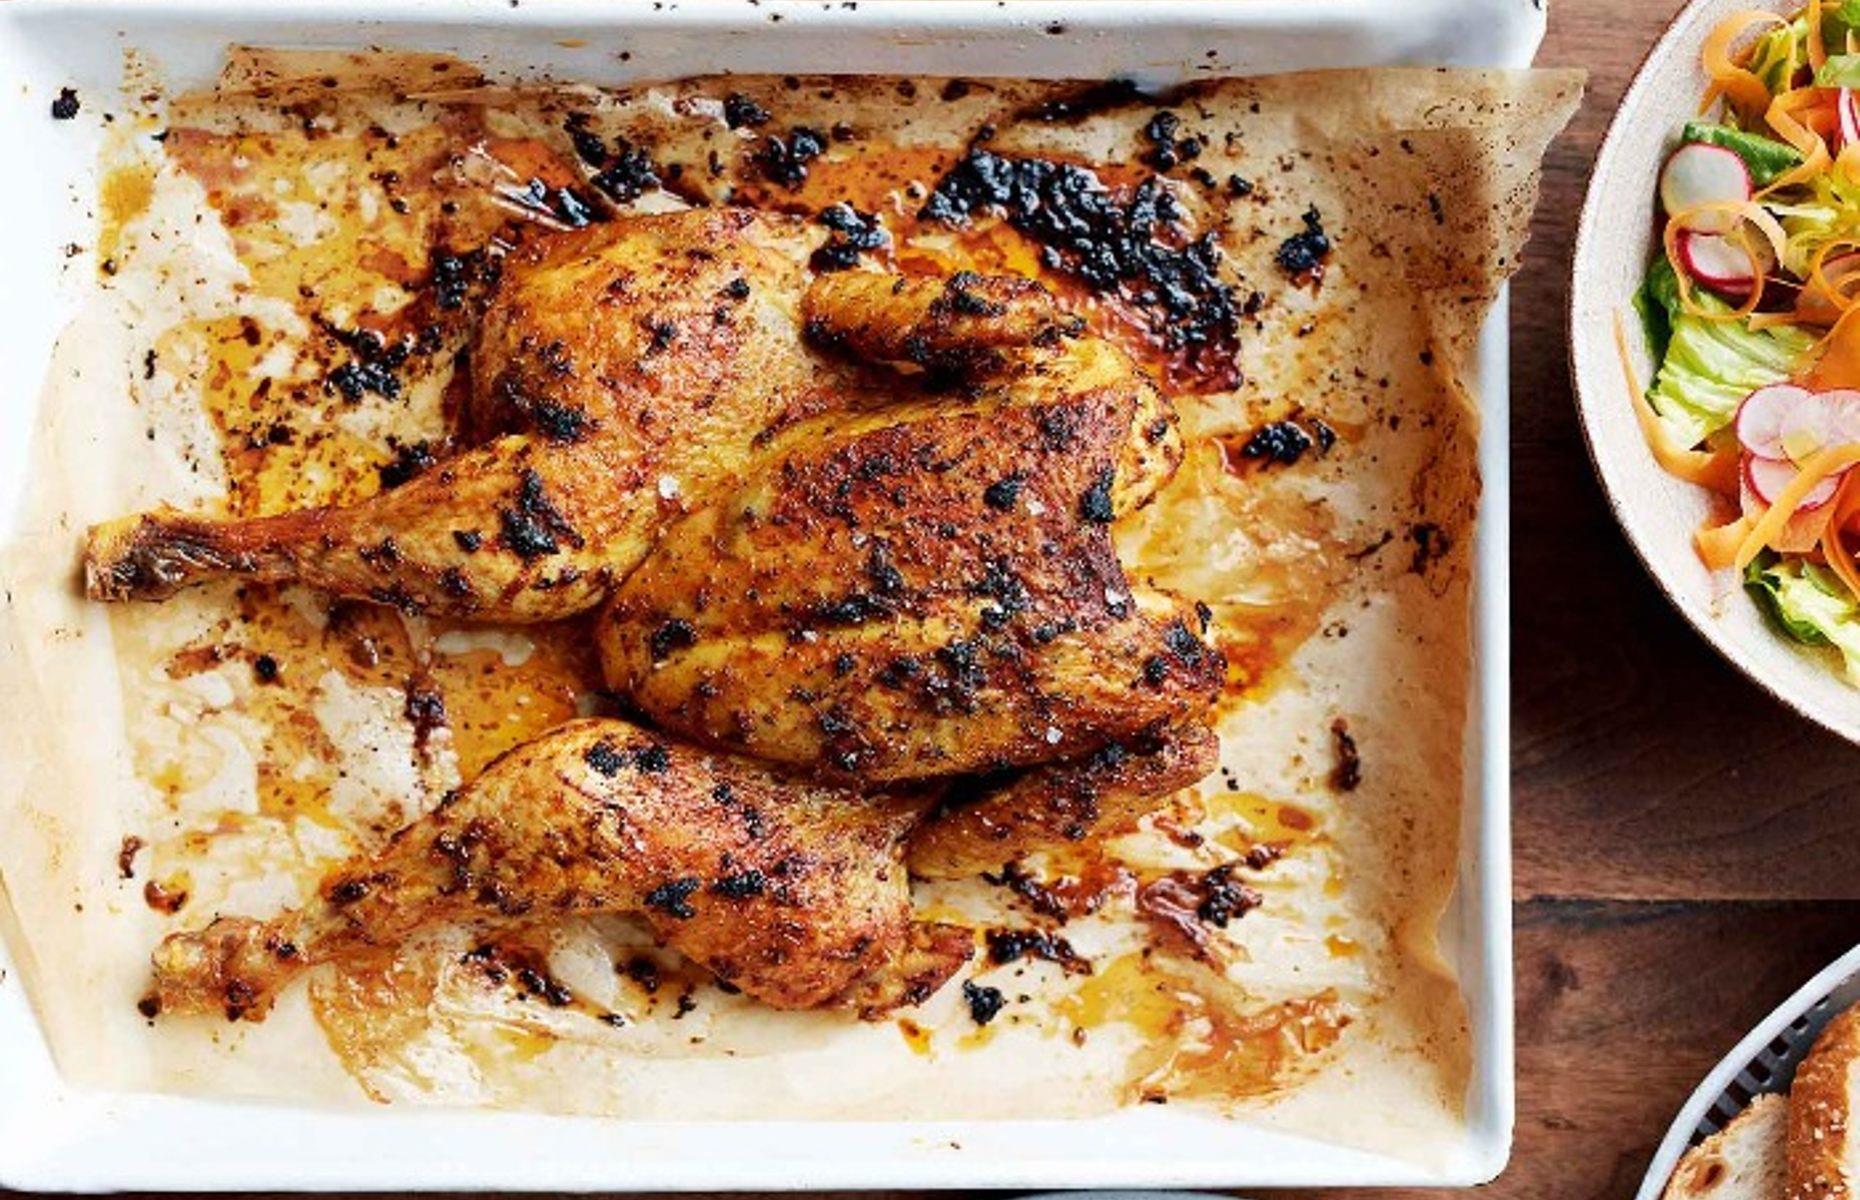 Treat yourself to these sensational chicken recipes